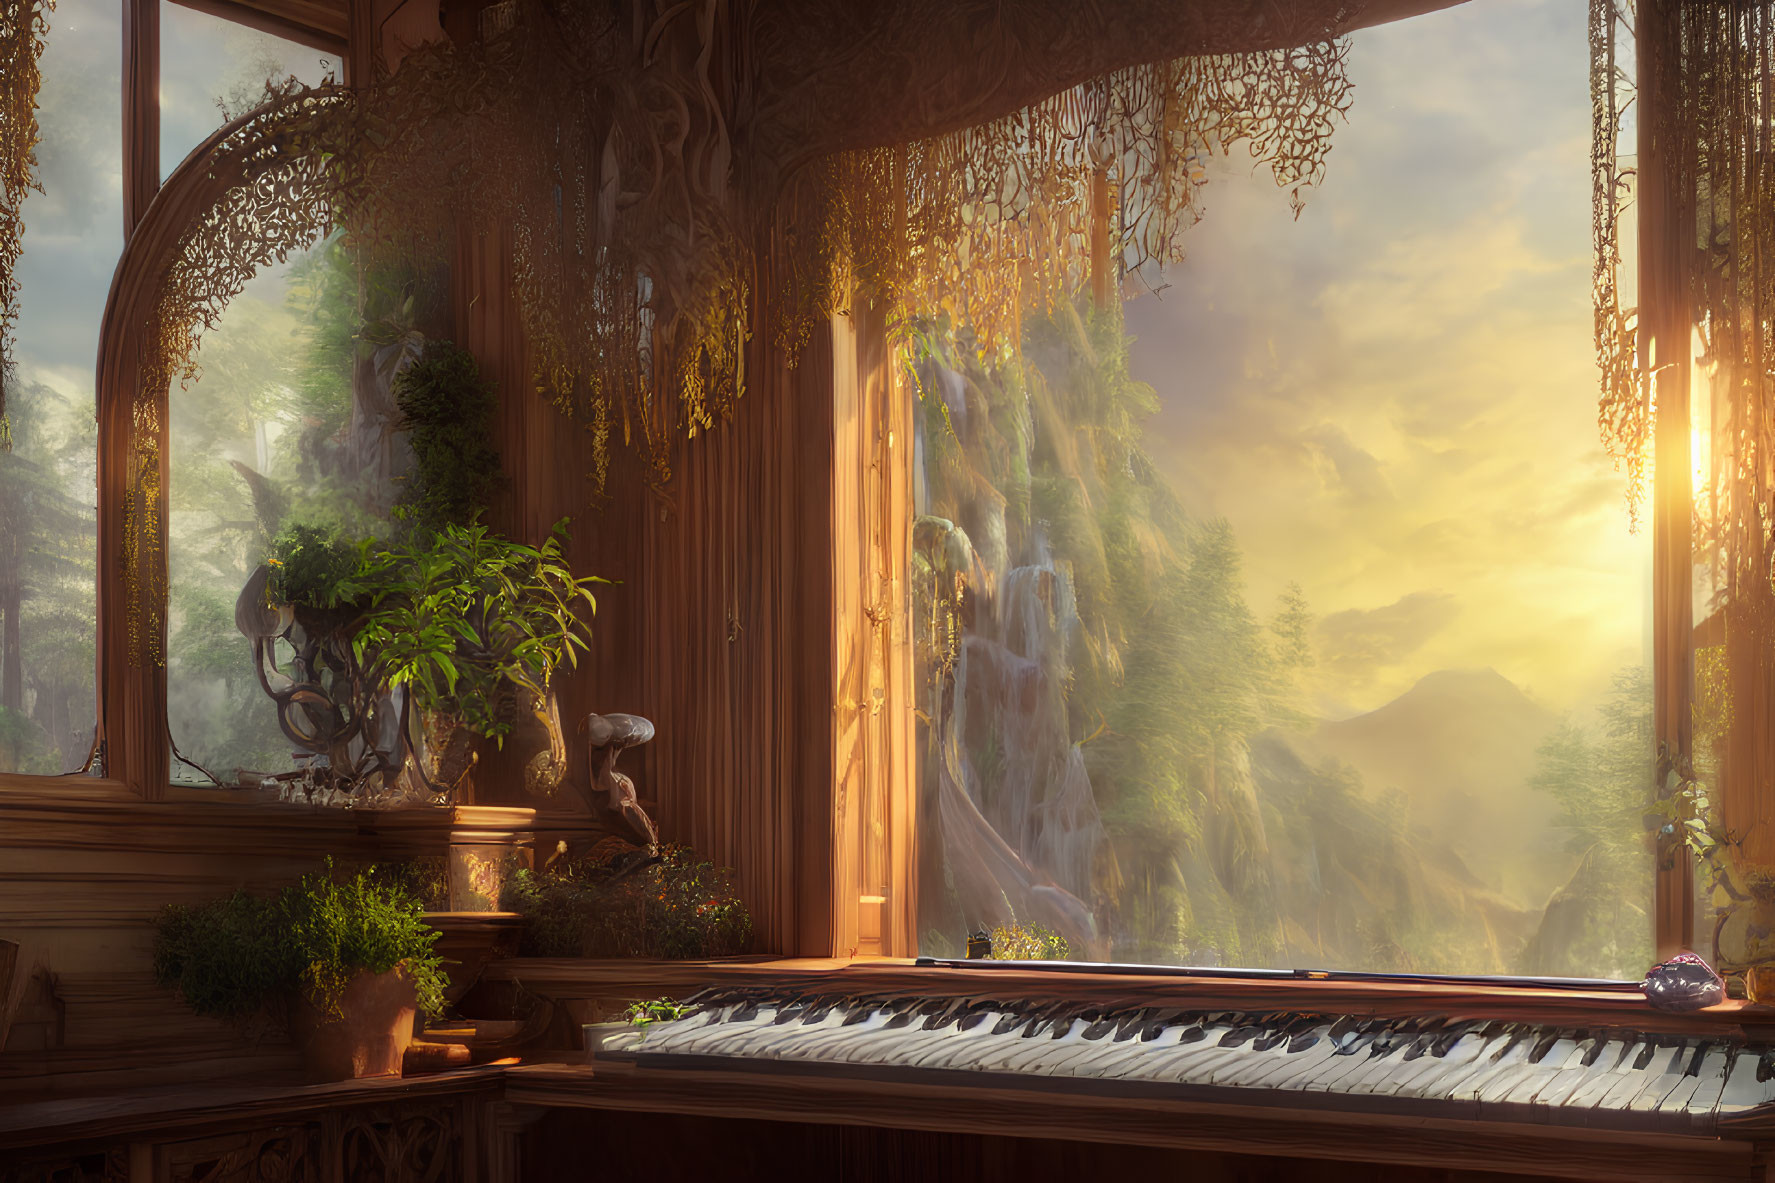 Luxurious Room with Grand Piano and Scenic View